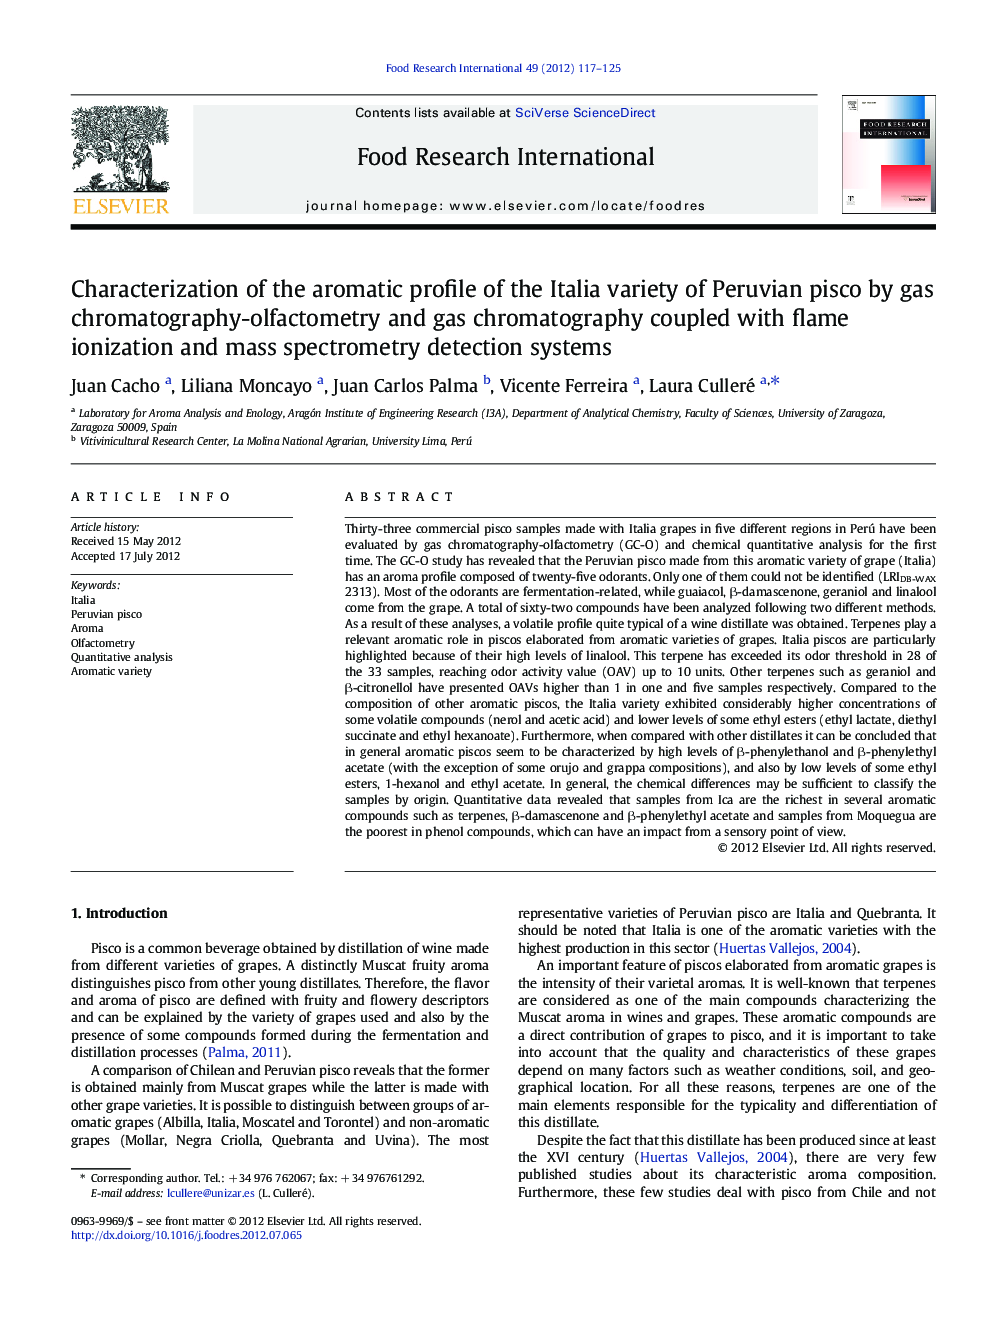 Characterization of the aromatic profile of the Italia variety of Peruvian pisco by gas chromatography-olfactometry and gas chromatography coupled with flame ionization and mass spectrometry detection systems